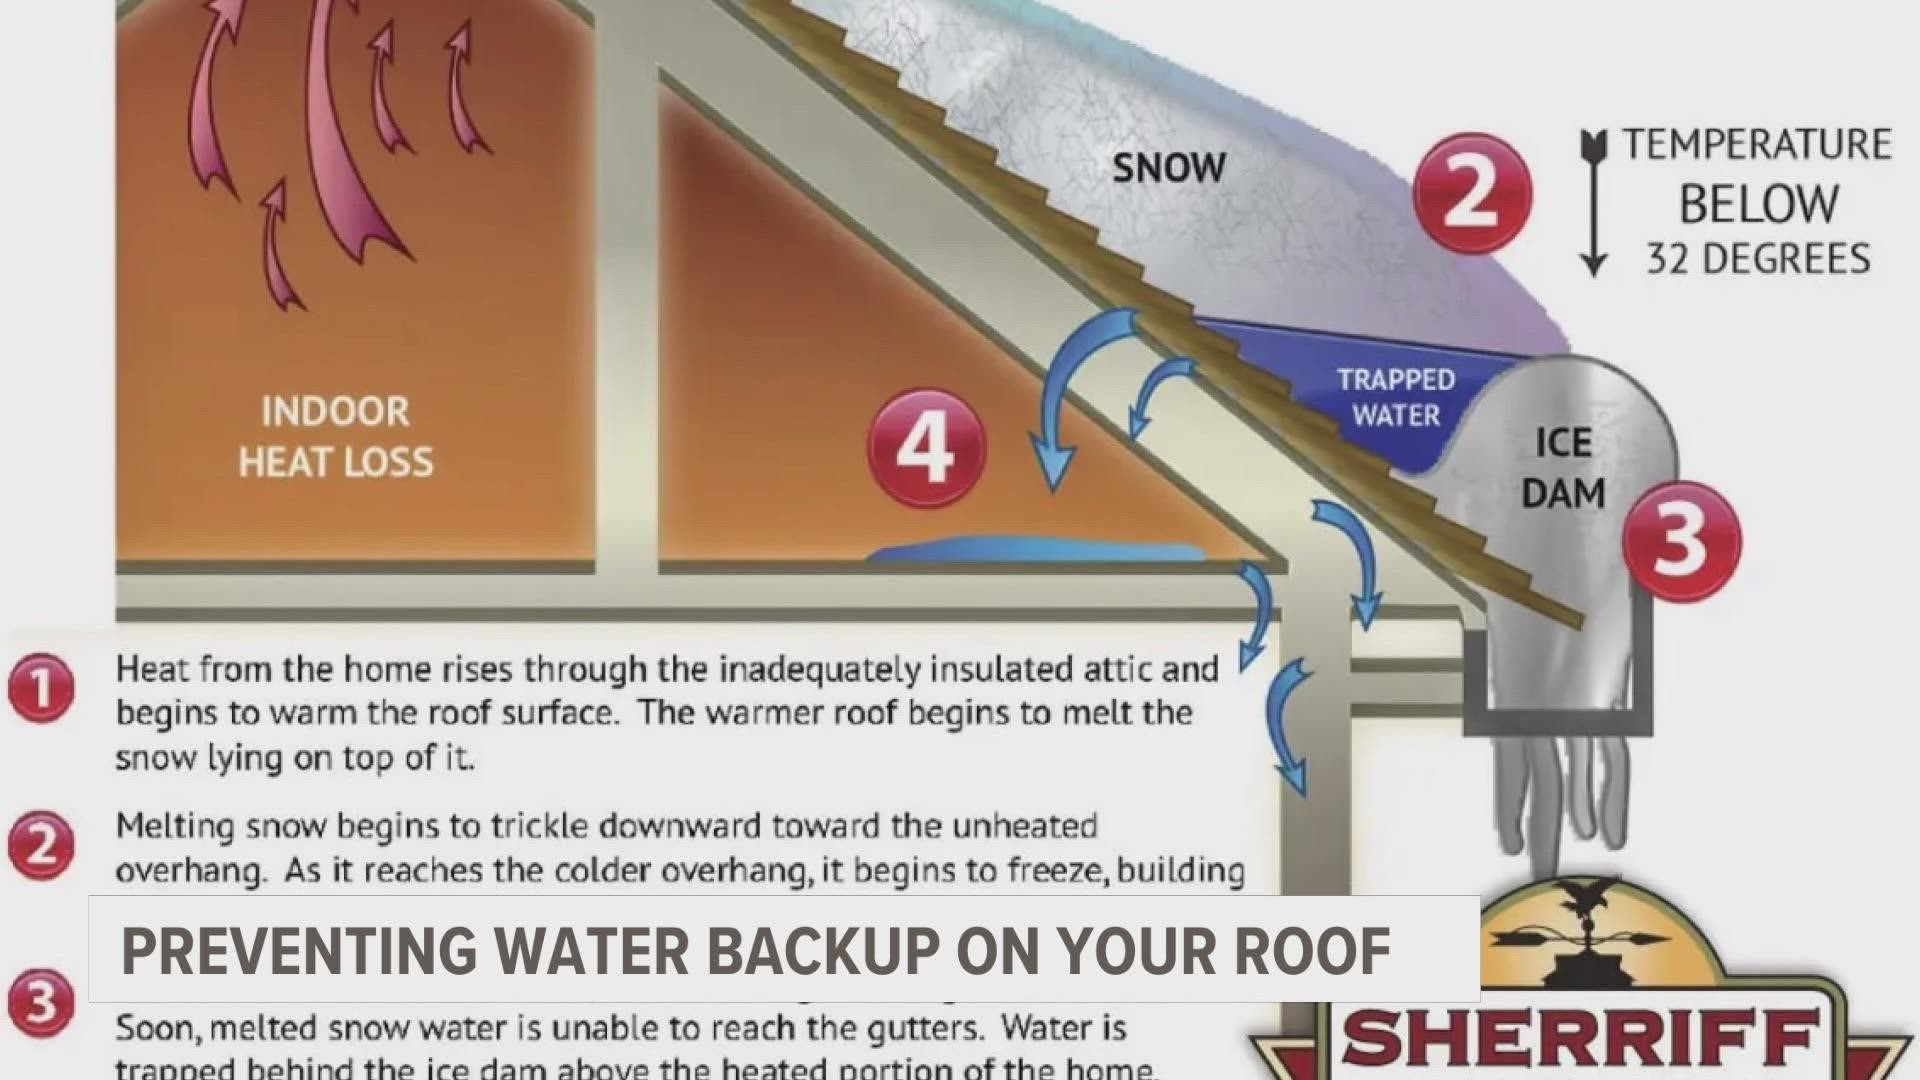 With a warm up and rain on the way, all that build up of ice and snow on your roof could cause problems.